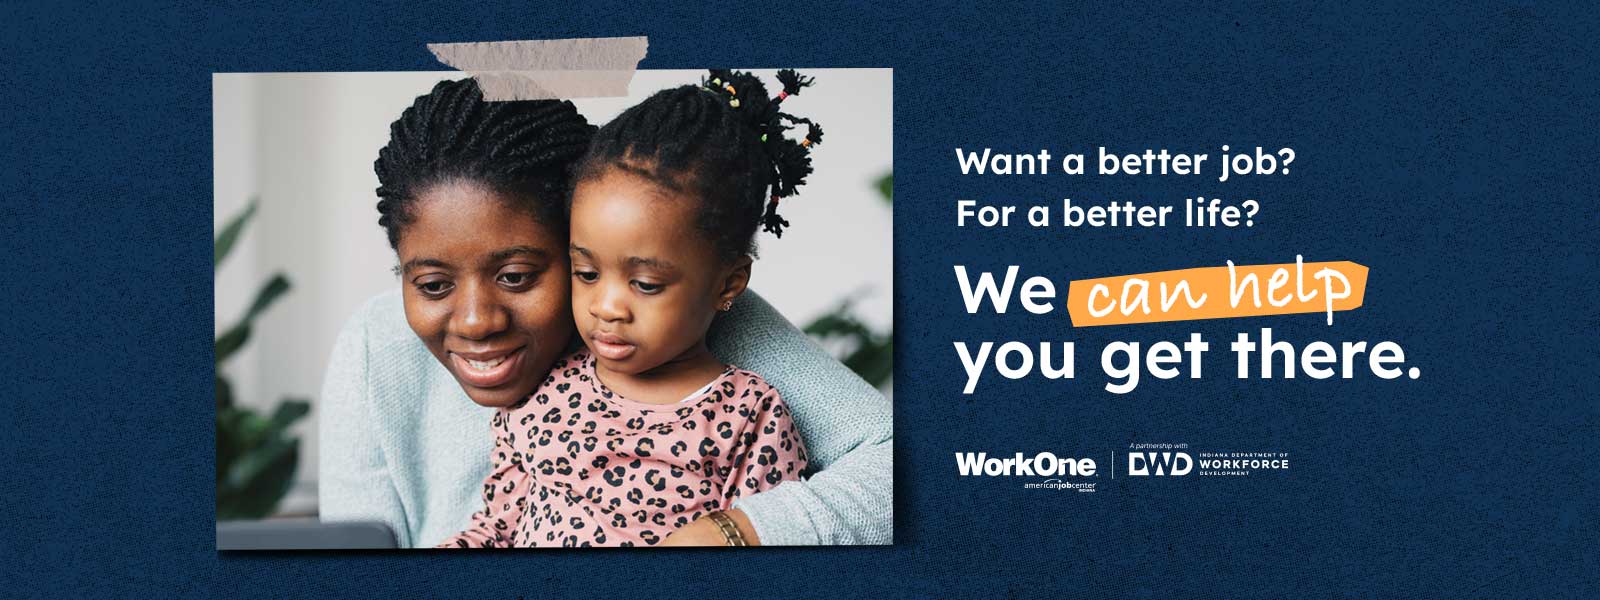 Want a better job? For a better life? We can help you get there. Includes DWD and WorkOne logos. Picture of a mother teaching her daughter something on a computer.